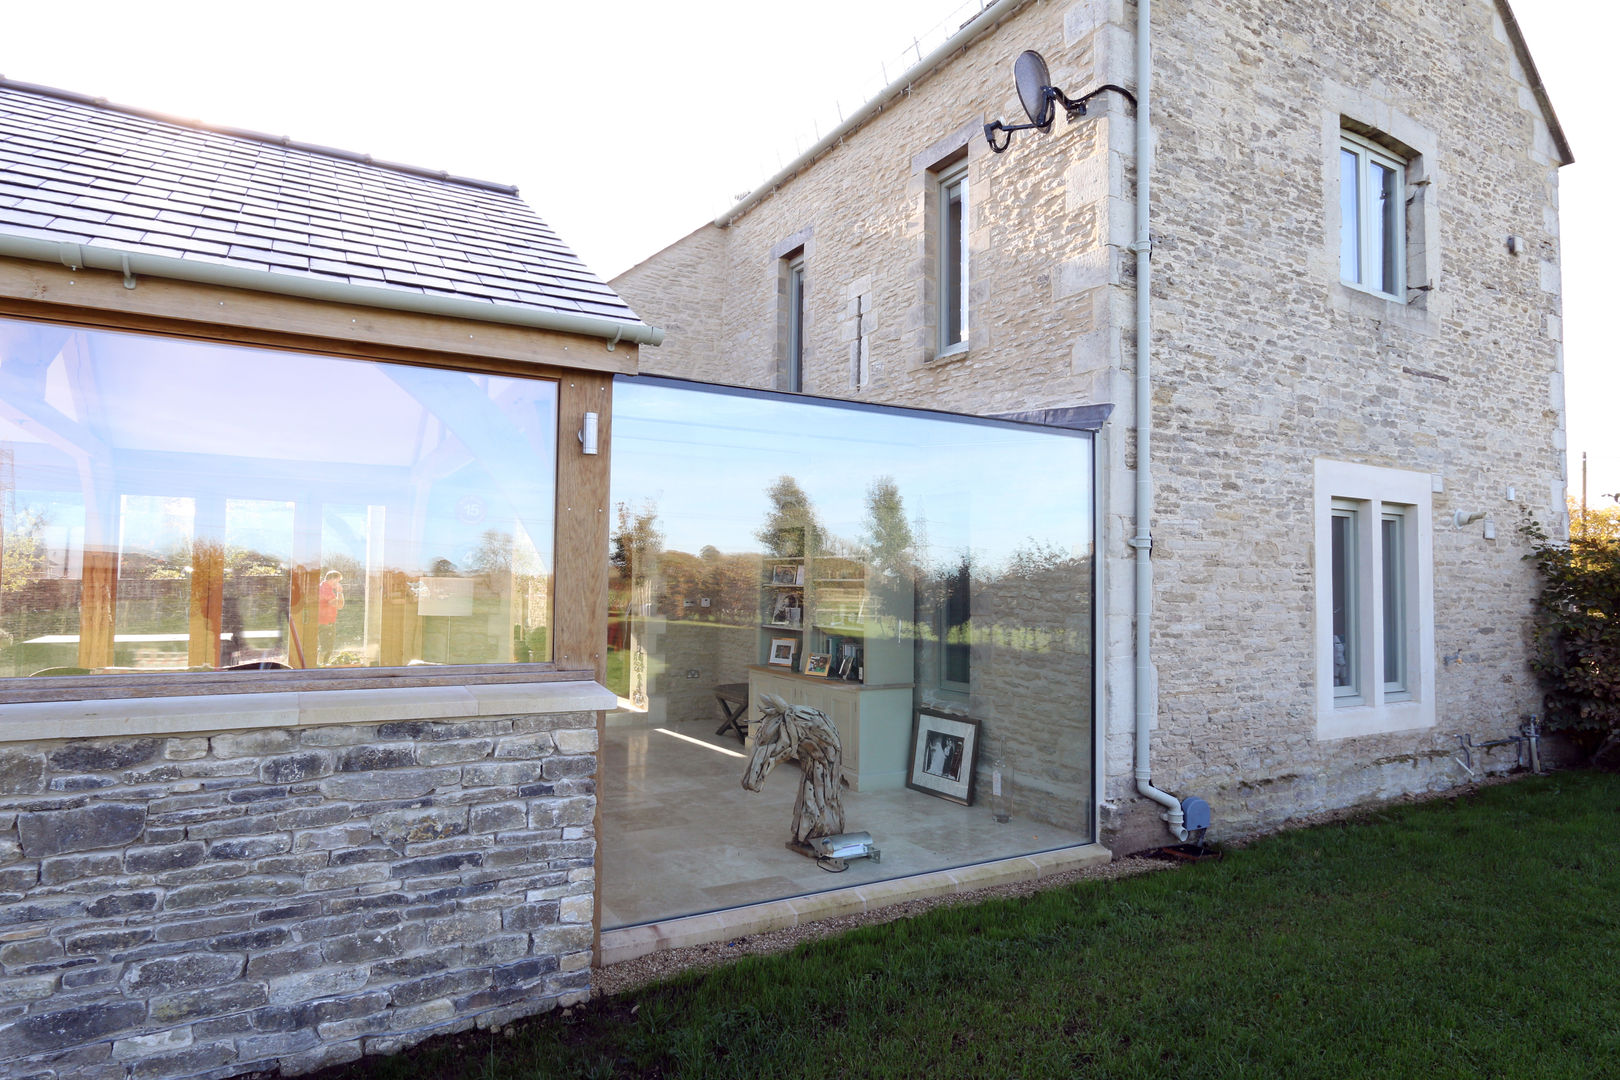 Green Barn homify 컨트리스타일 온실 Green Barn,Project,Structural Glass,Cottage,Conservatory